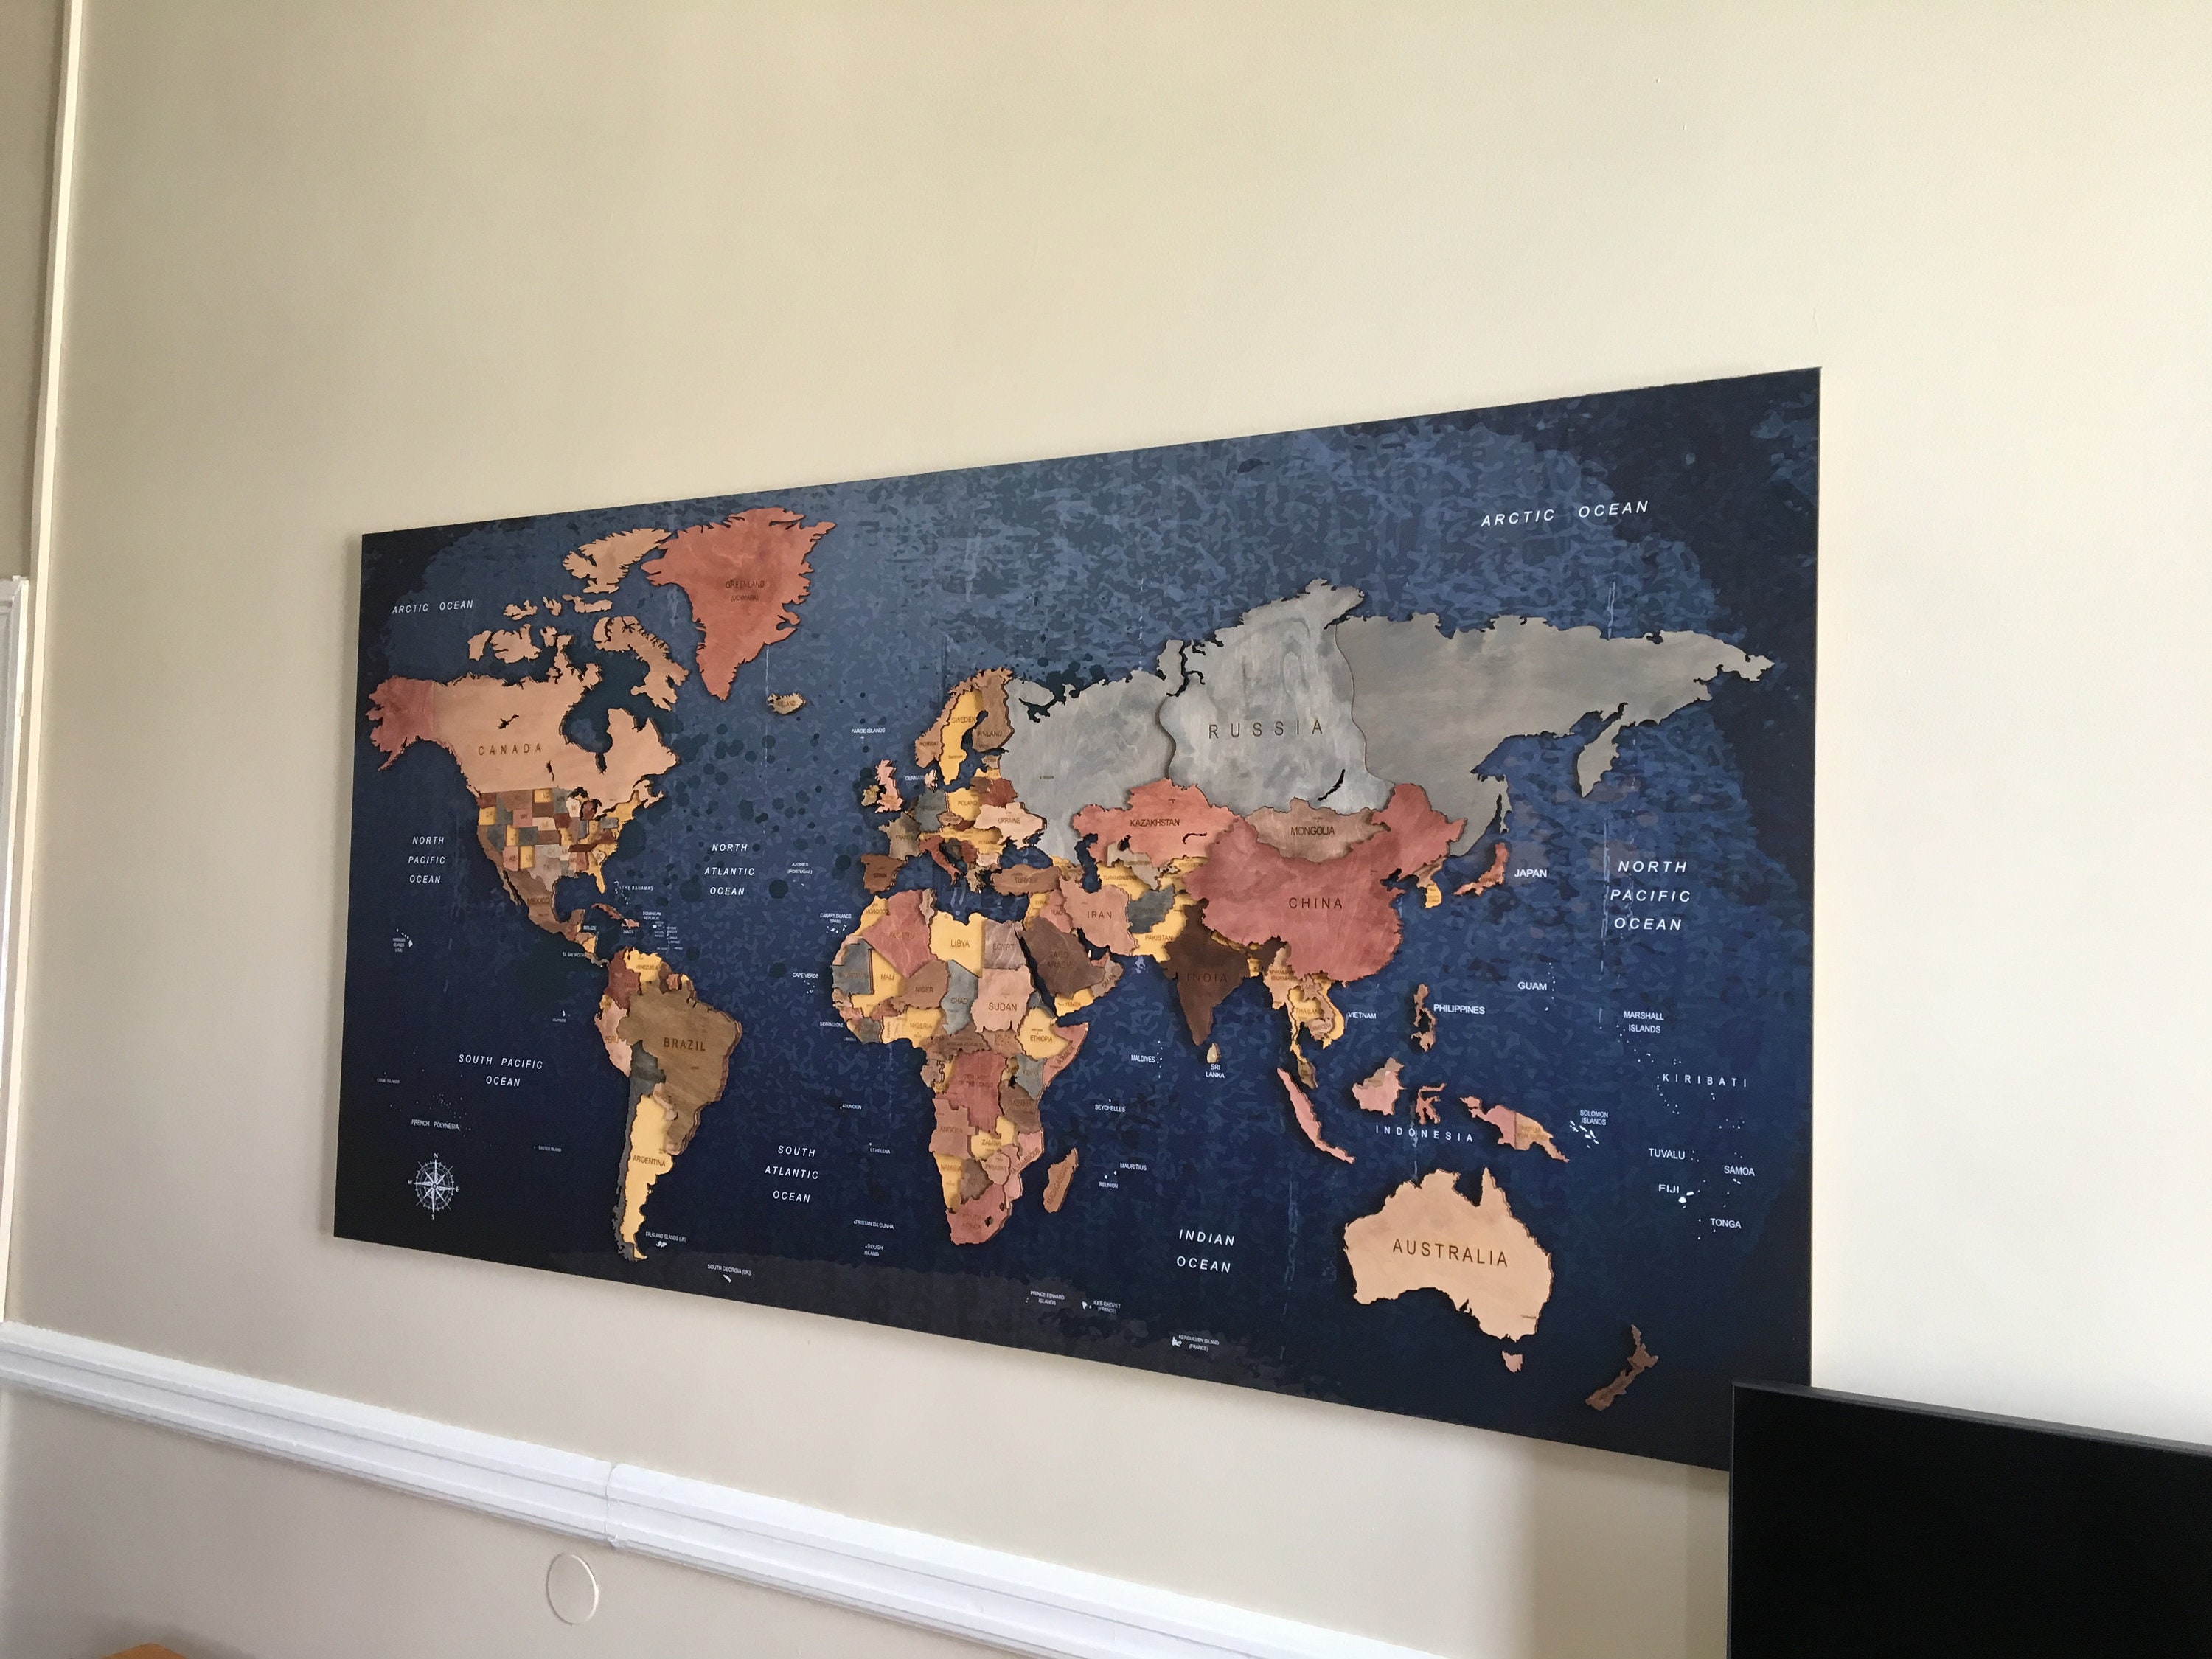 Canvas Wall Art - World Map on Wood by Jamie MacDowell ( Maps > World Map art) - 18x26 in